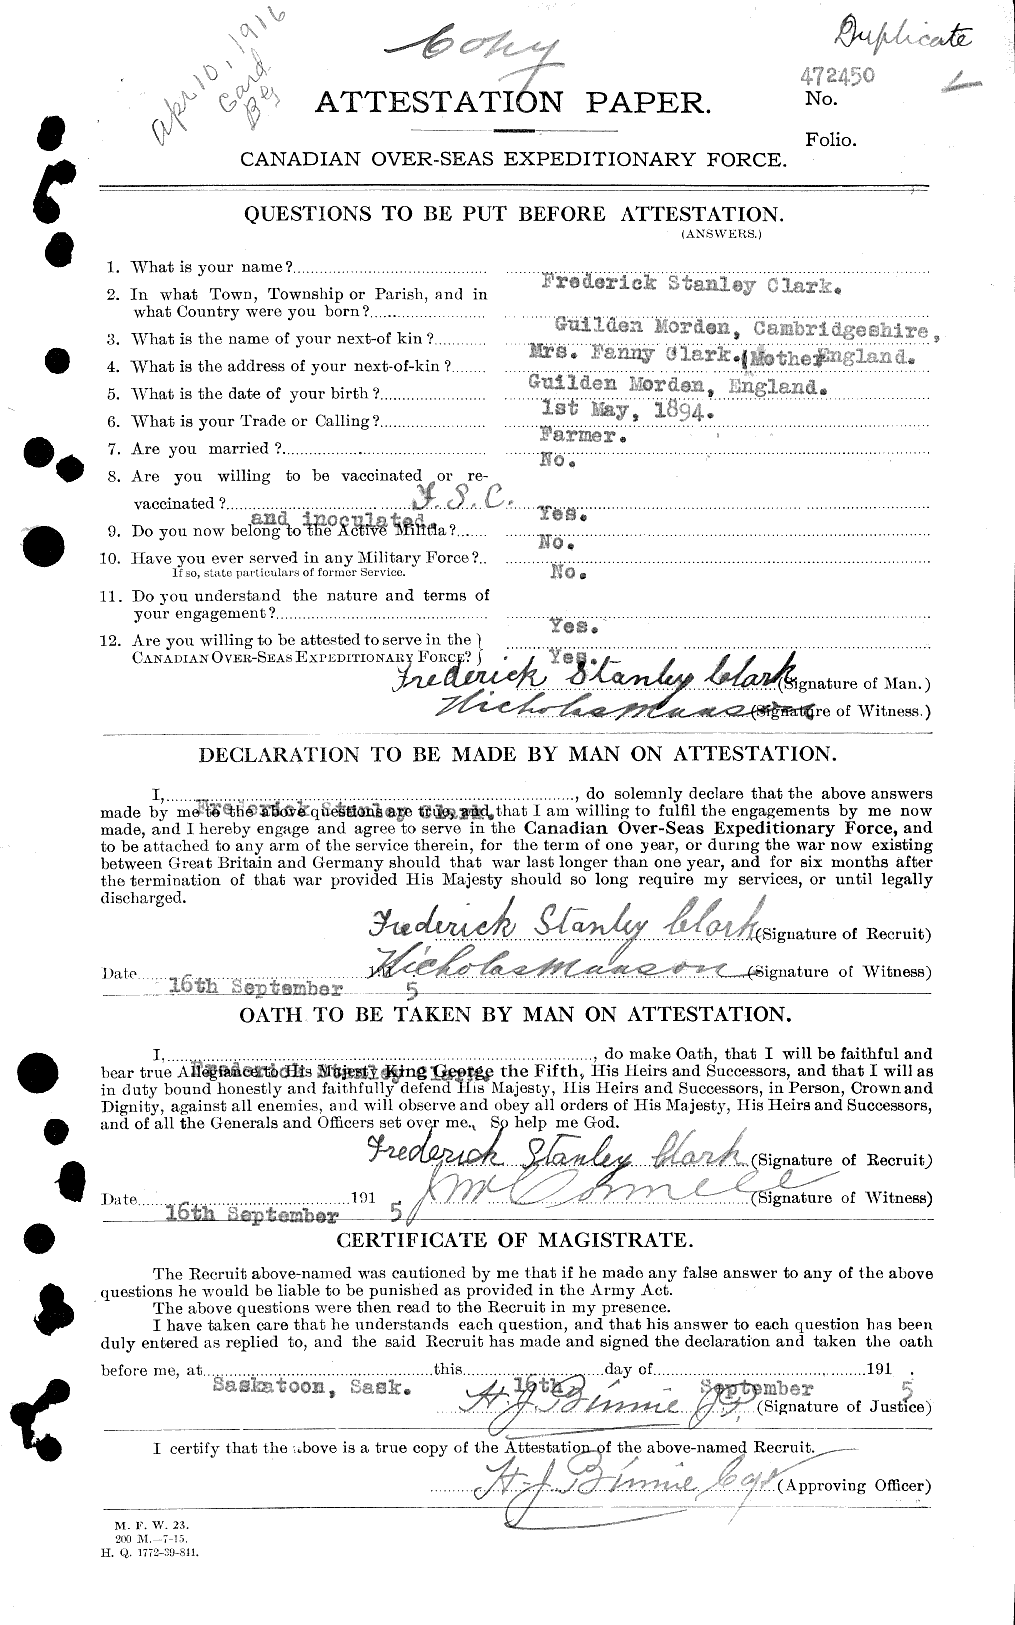 Personnel Records of the First World War - CEF 020989a